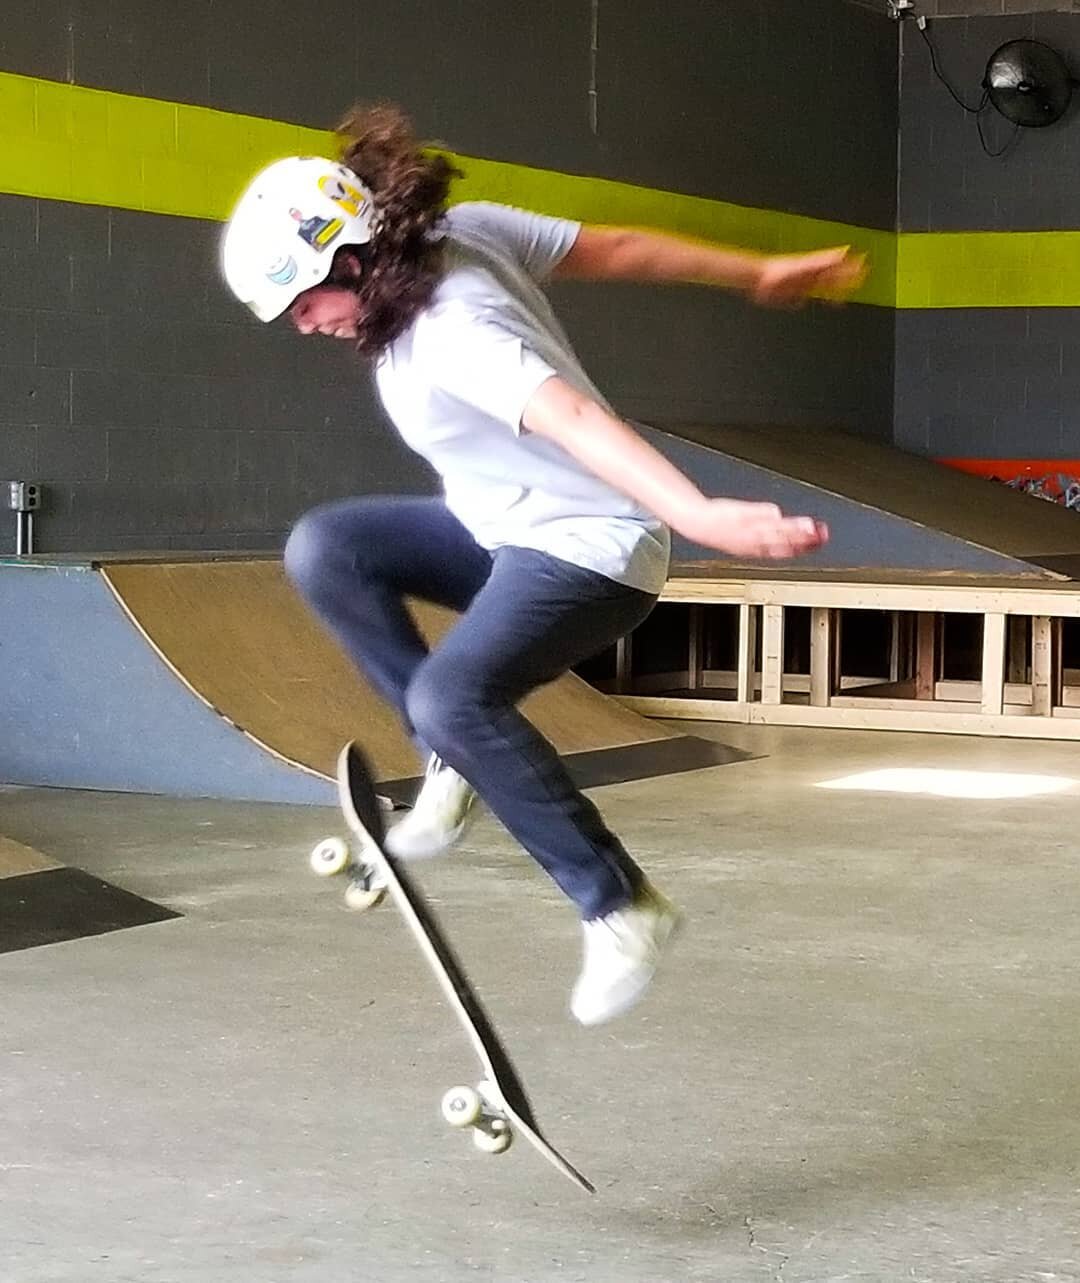 @fiona_from._.shrek tearing it up at @qskatepark this morning! So fun watching her